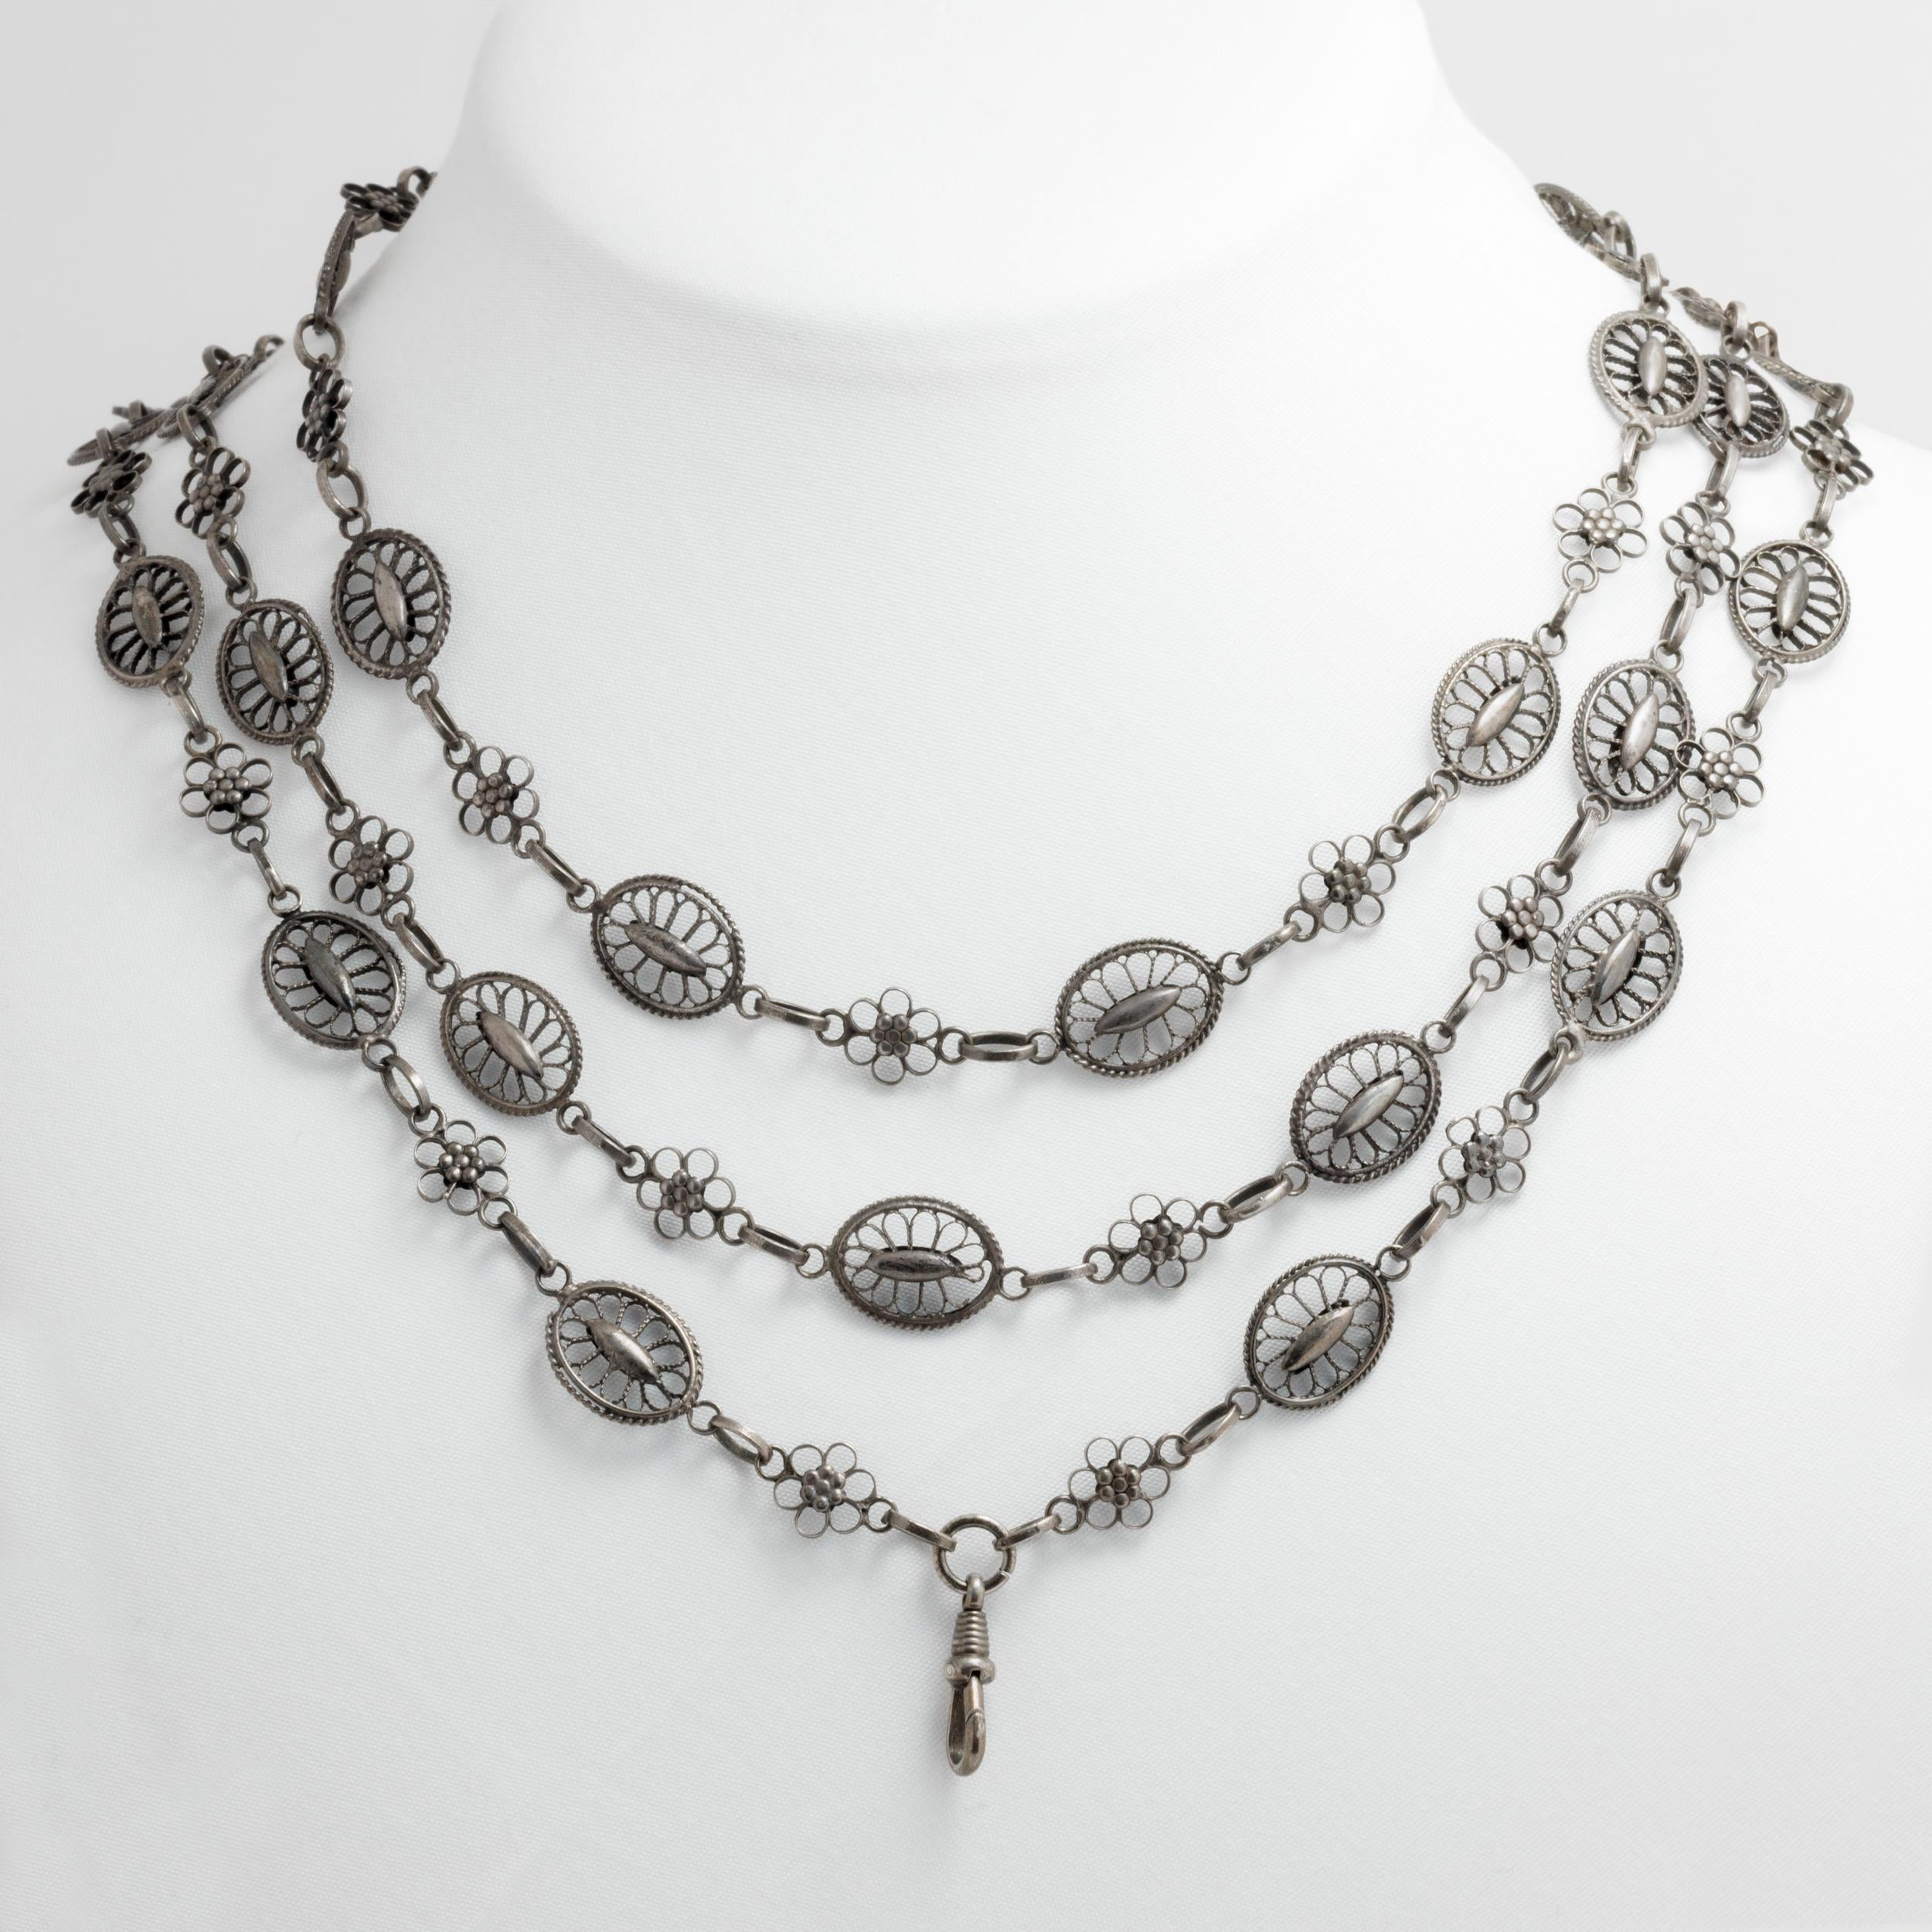 French 19th Century Lacey Silver Muff Chain Sautoir

L: 158 cm / 62 in.
40 grams

Fabulous long French antique chain